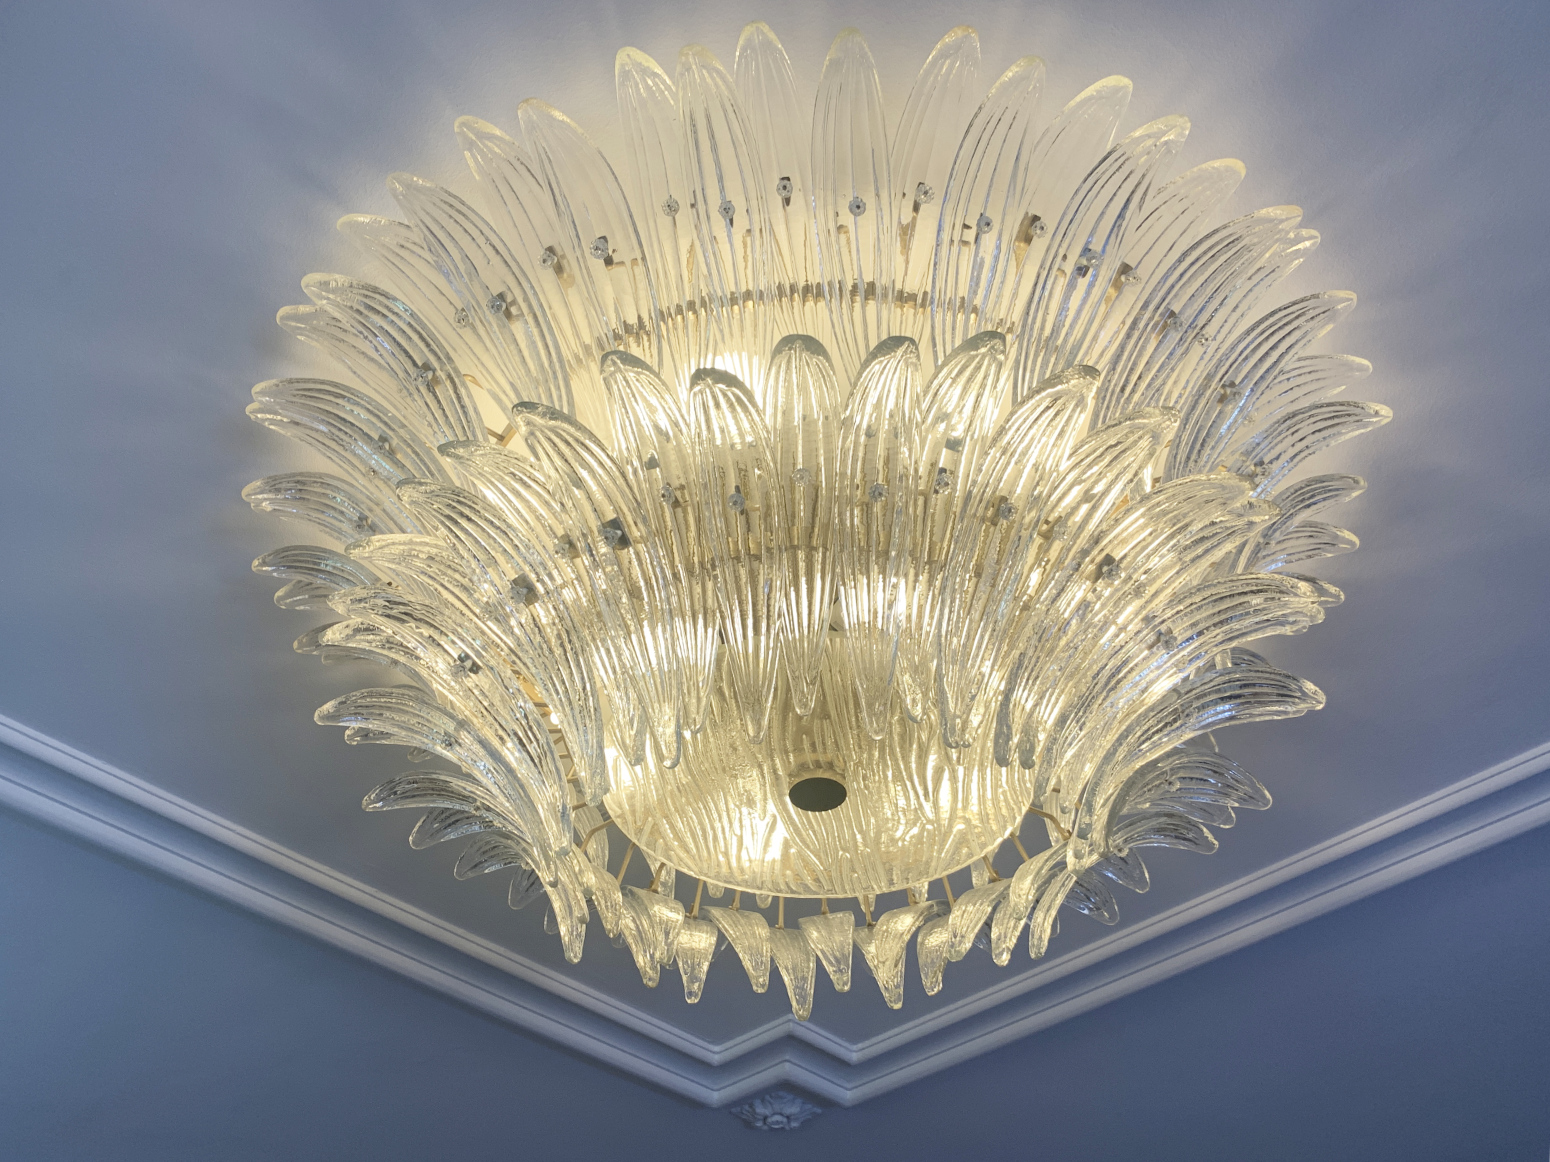 “SOLD” Palmette Ceiling Lamp, Flush Mount, by Barovier & Toso, Murano, Italy, 1970s. The Chandelier has 16 Lights and 96 Murano Glass Palm Leaves by Barovier & Toso